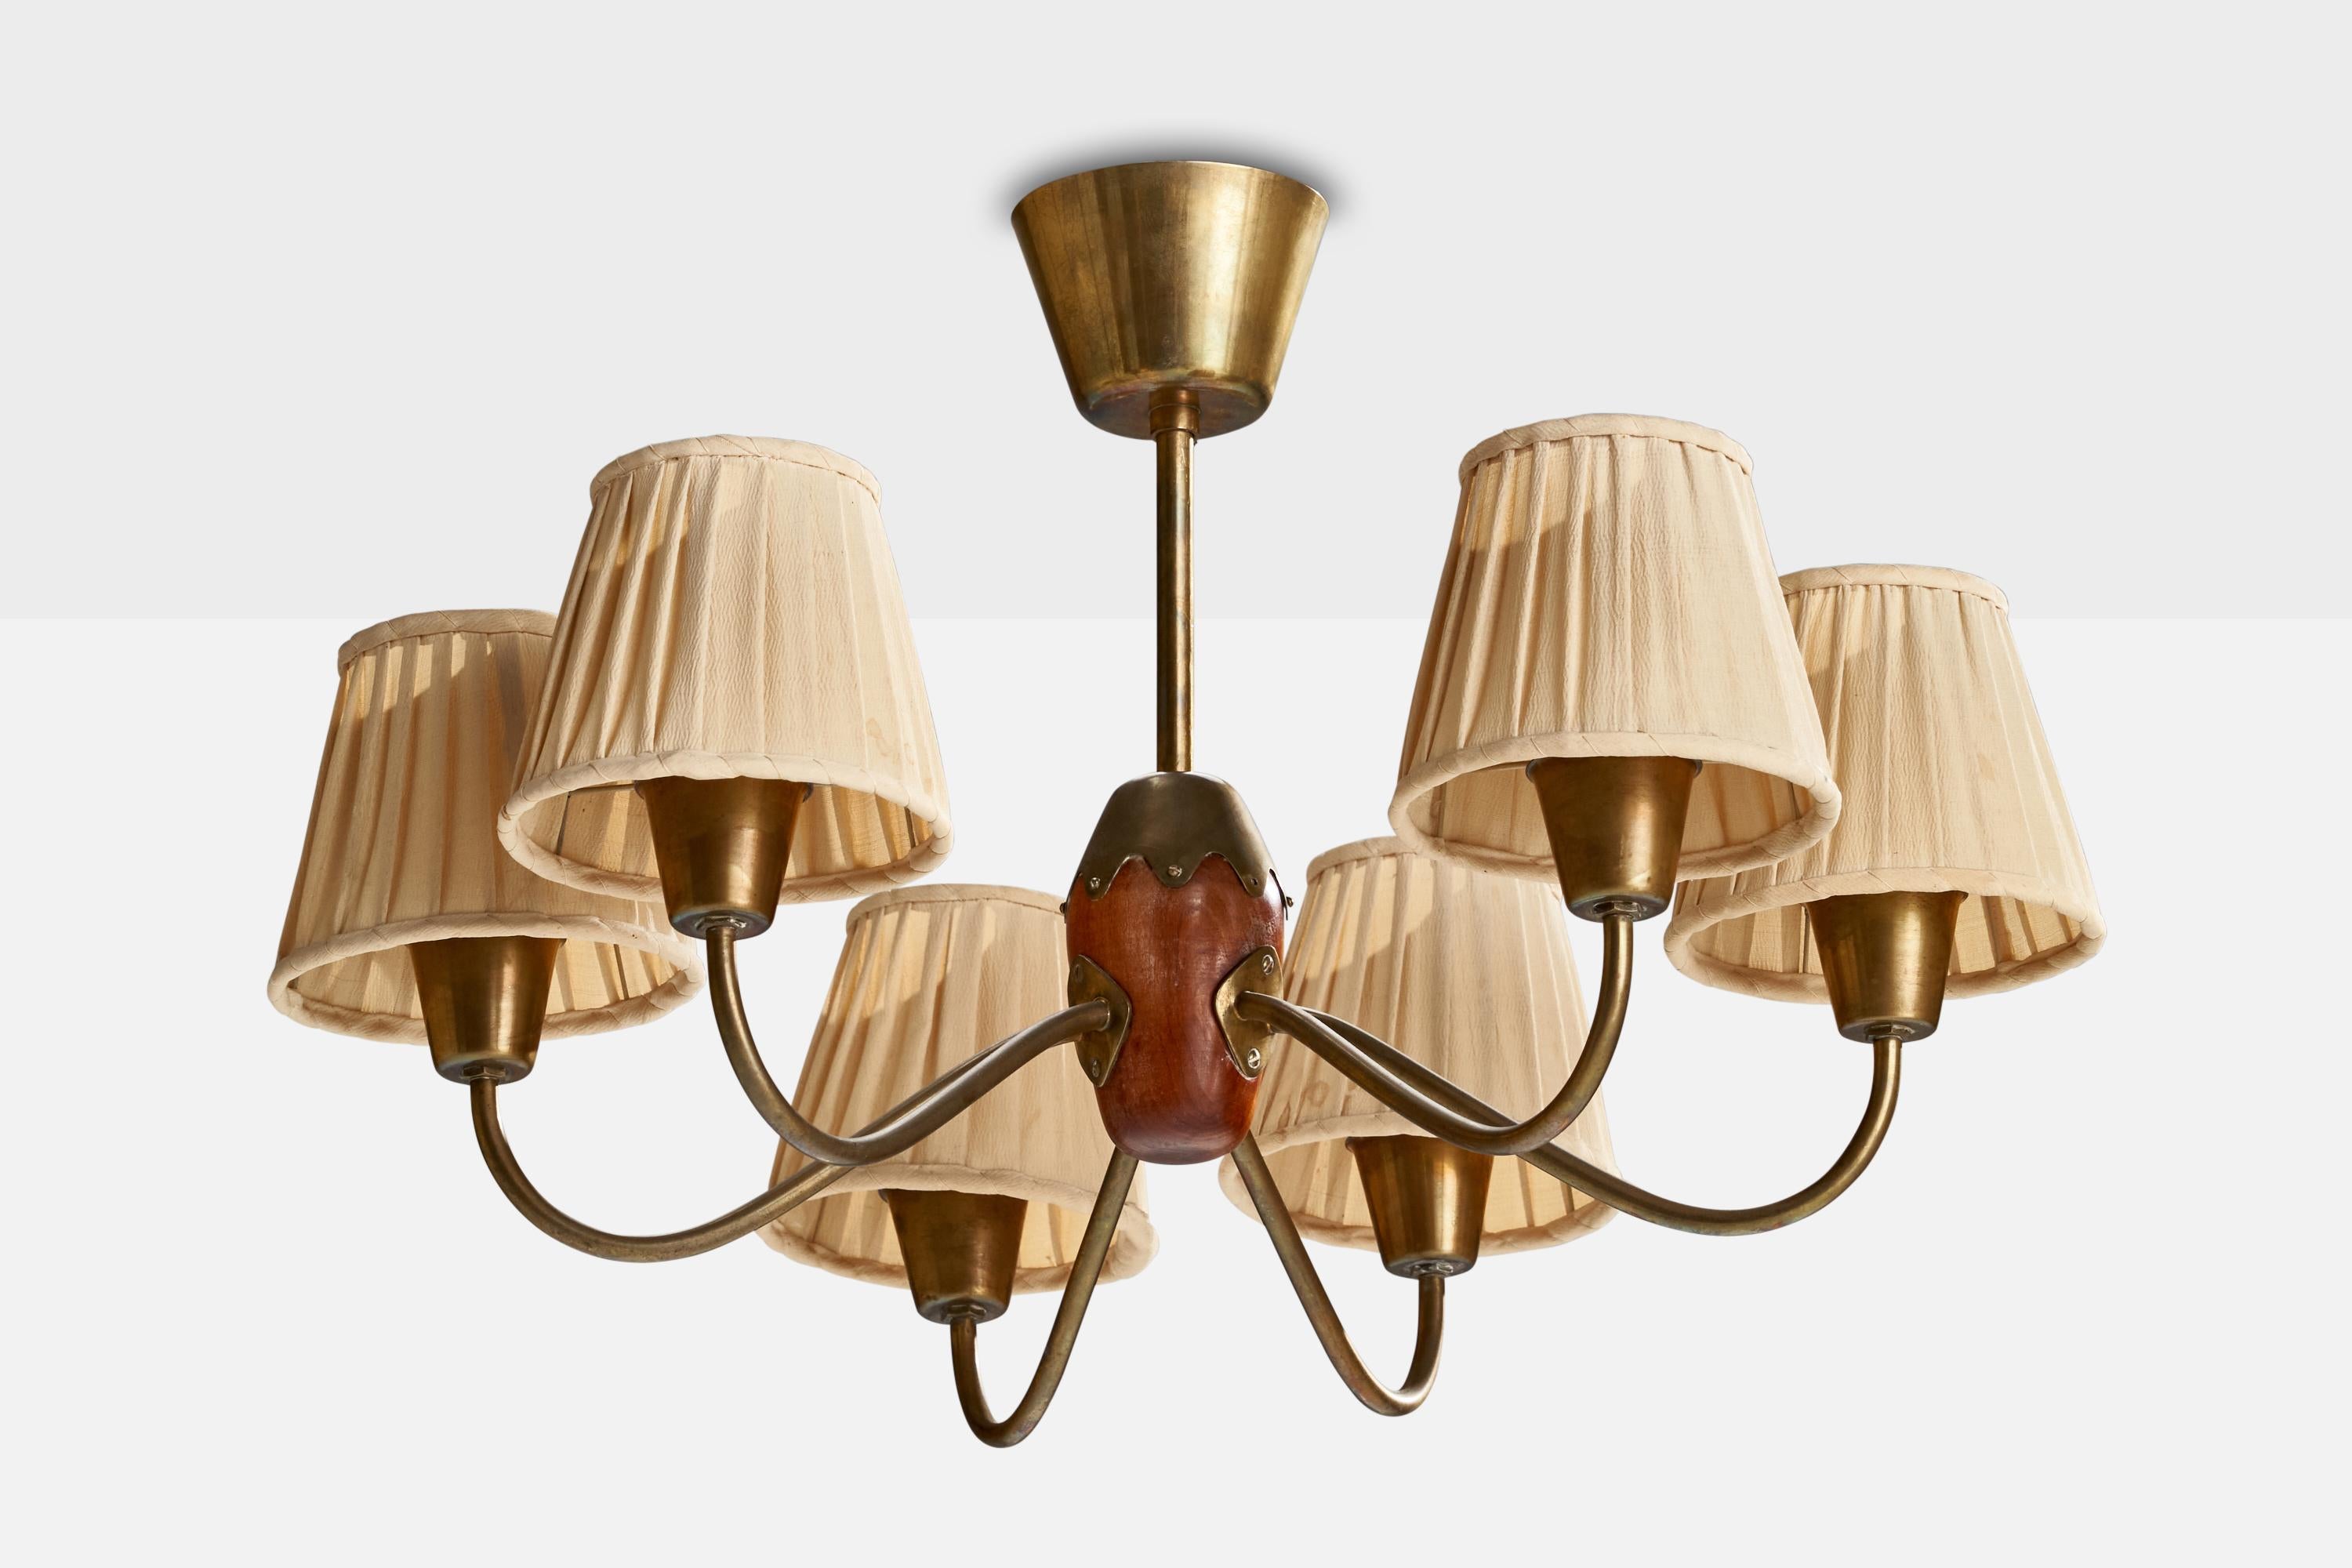 A brass, stained beech and beige fabric chandelier designed and produced by Bergboms, Sweden, 1940s.

Dimensions of canopy (inches): 3” H x 4.25” Diameter
Small tear in one of the shades
Socket takes standard E-26 bulbs. 6 socket.There is no maximum